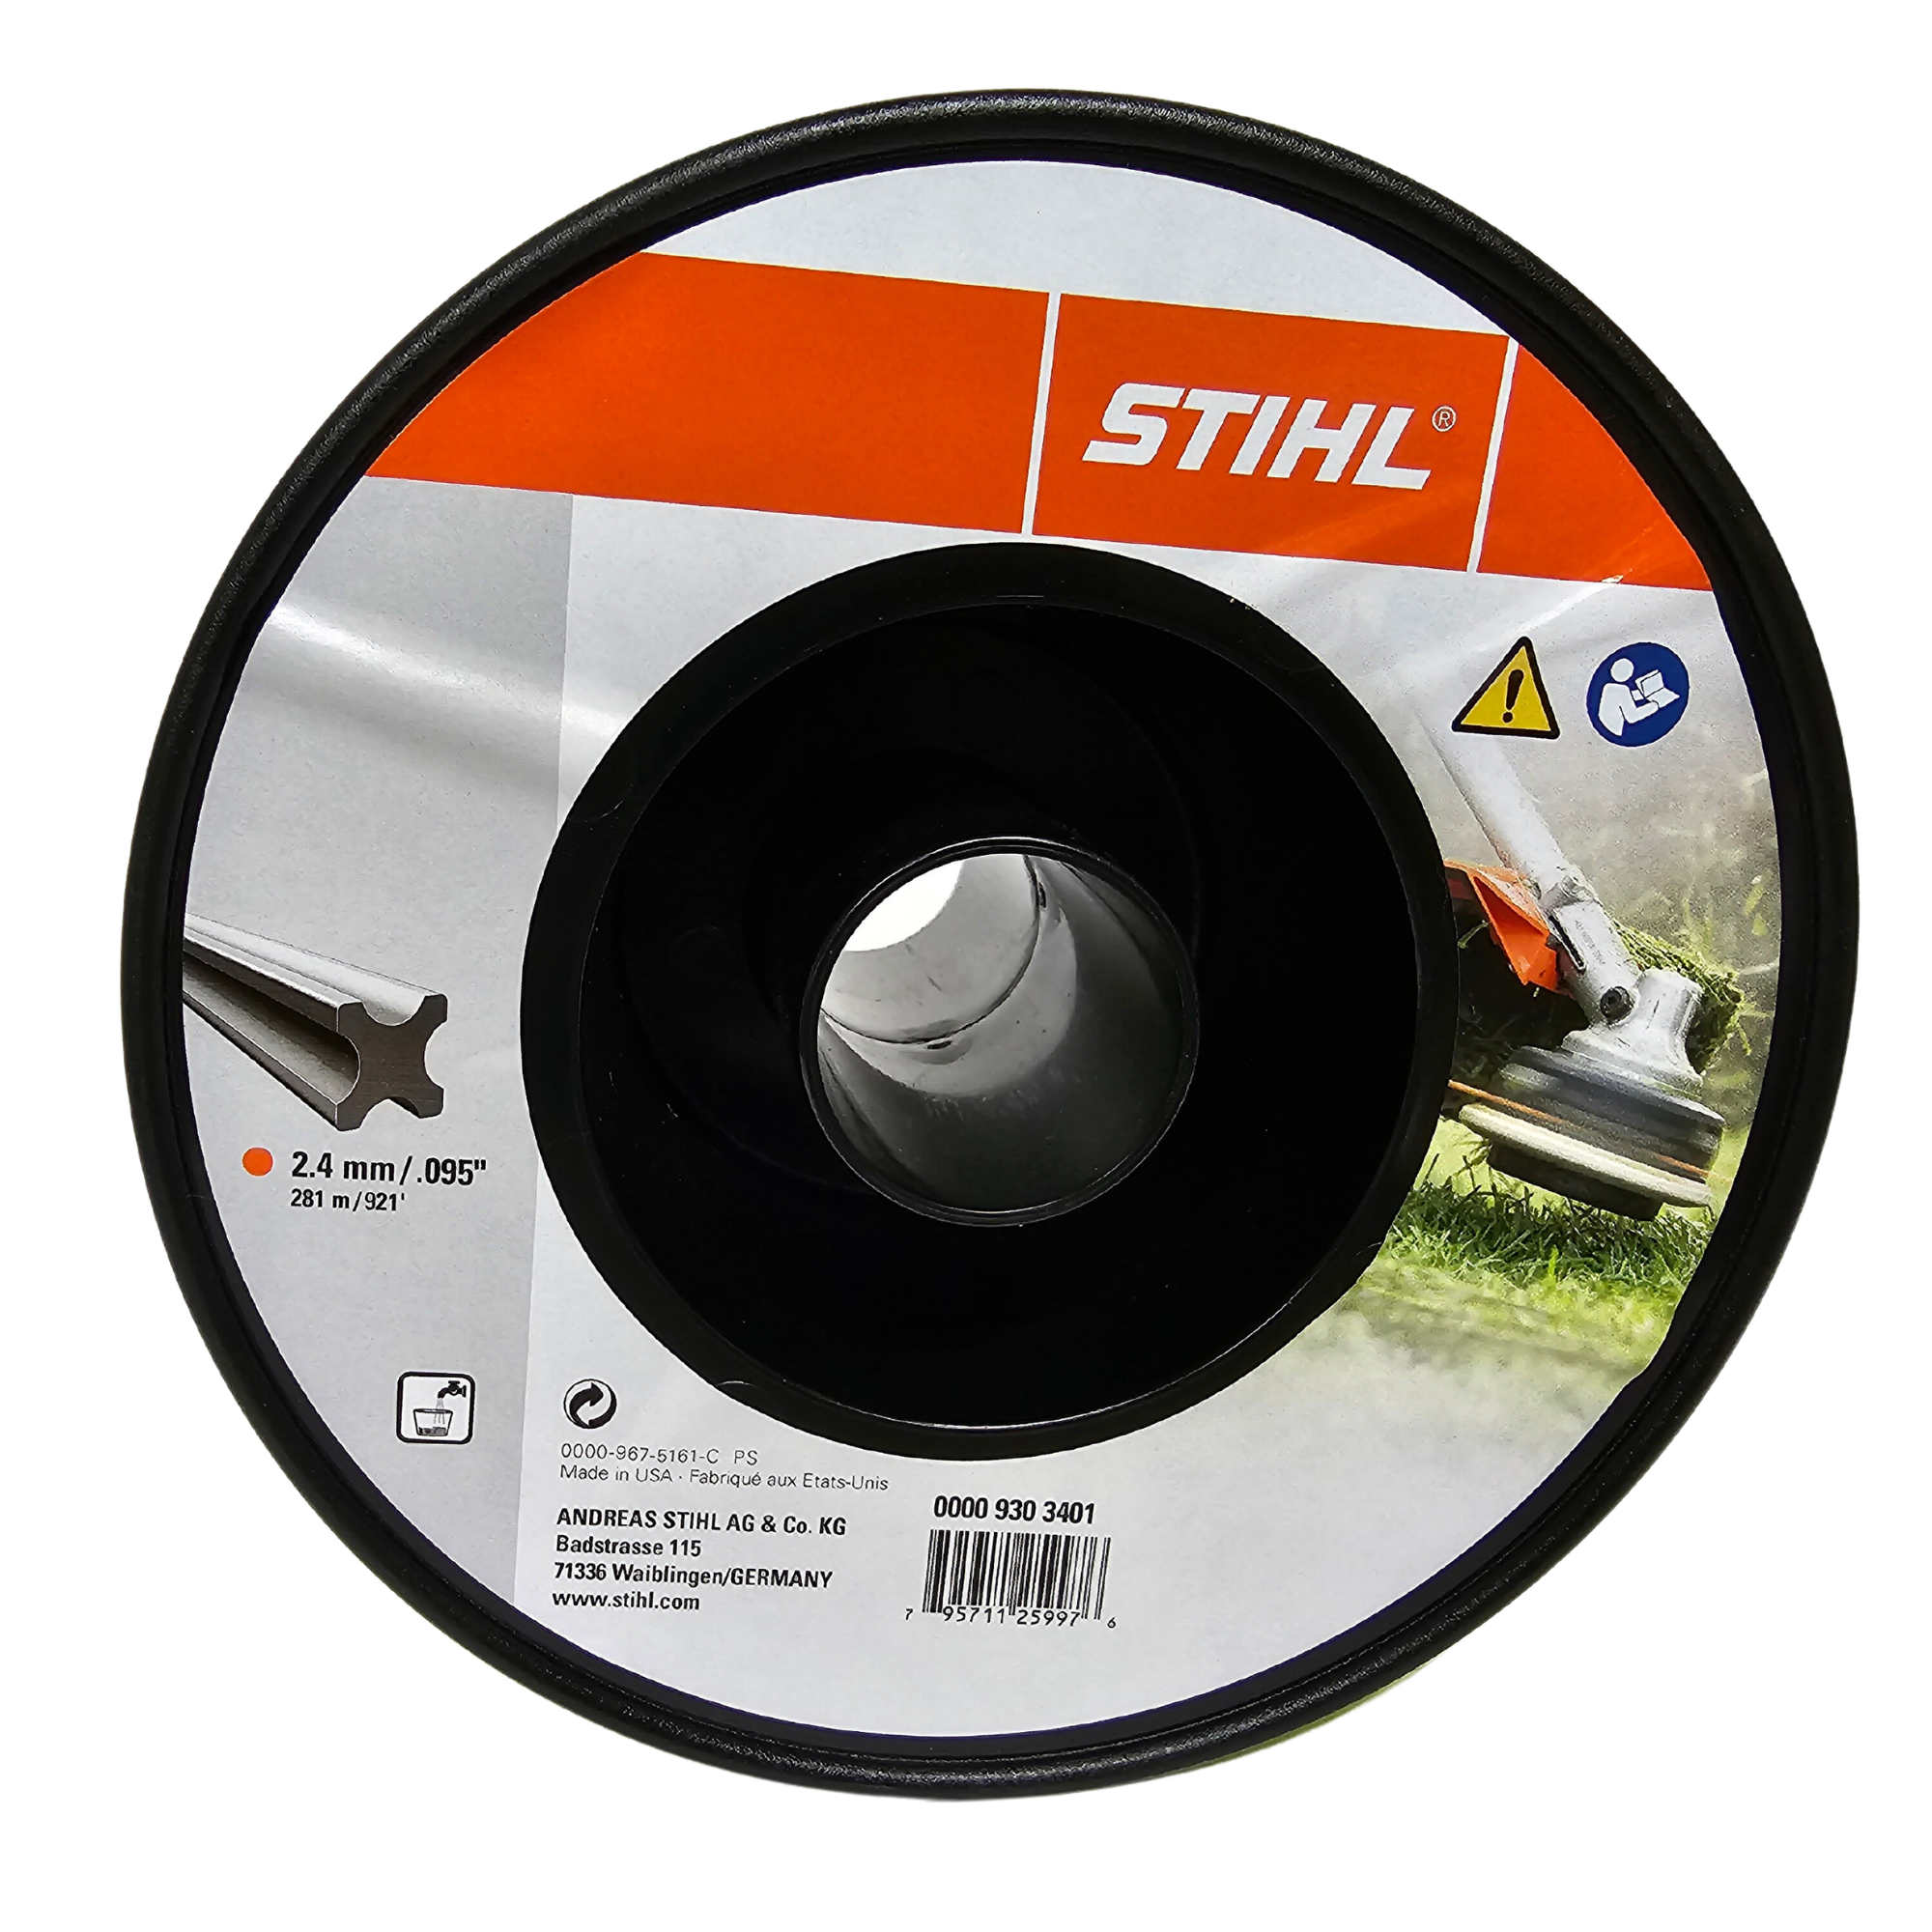 Stihl Commercial X Line Trimmer Line 2.4mm / .095" Spool | 0000 930 3401